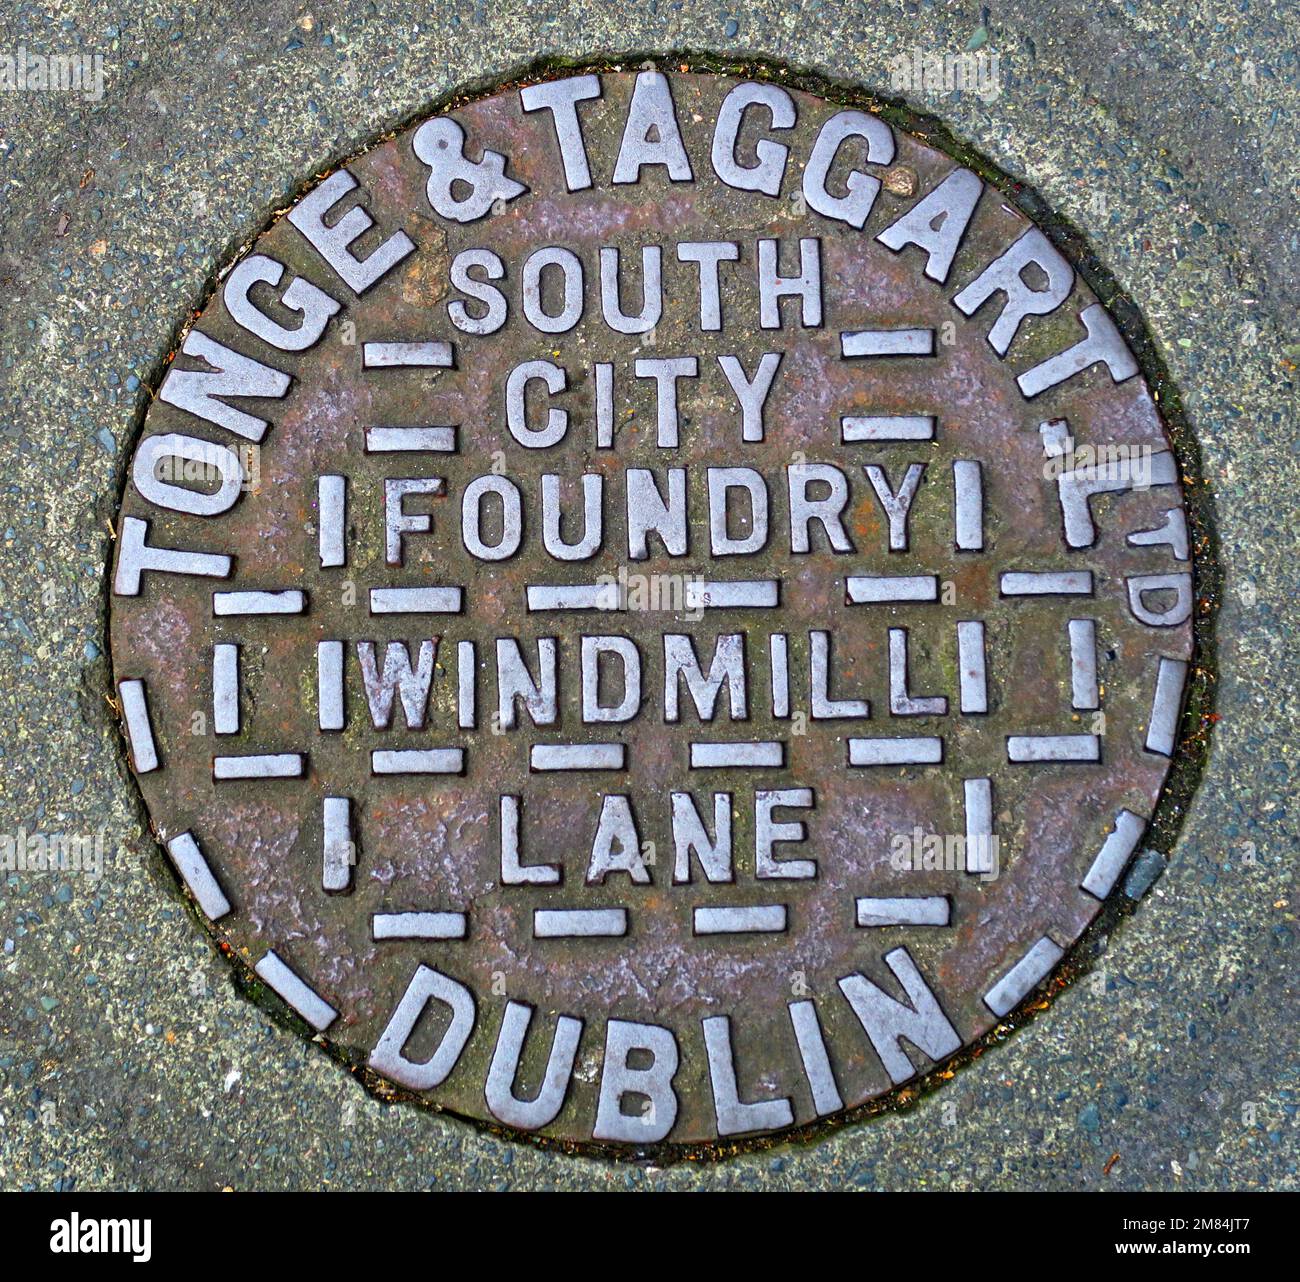 Cast iron Grid embossed with Windmill Lane, Dublin, Tonge & Taggart, South City Foundry, Eire, Ireland Stock Photo